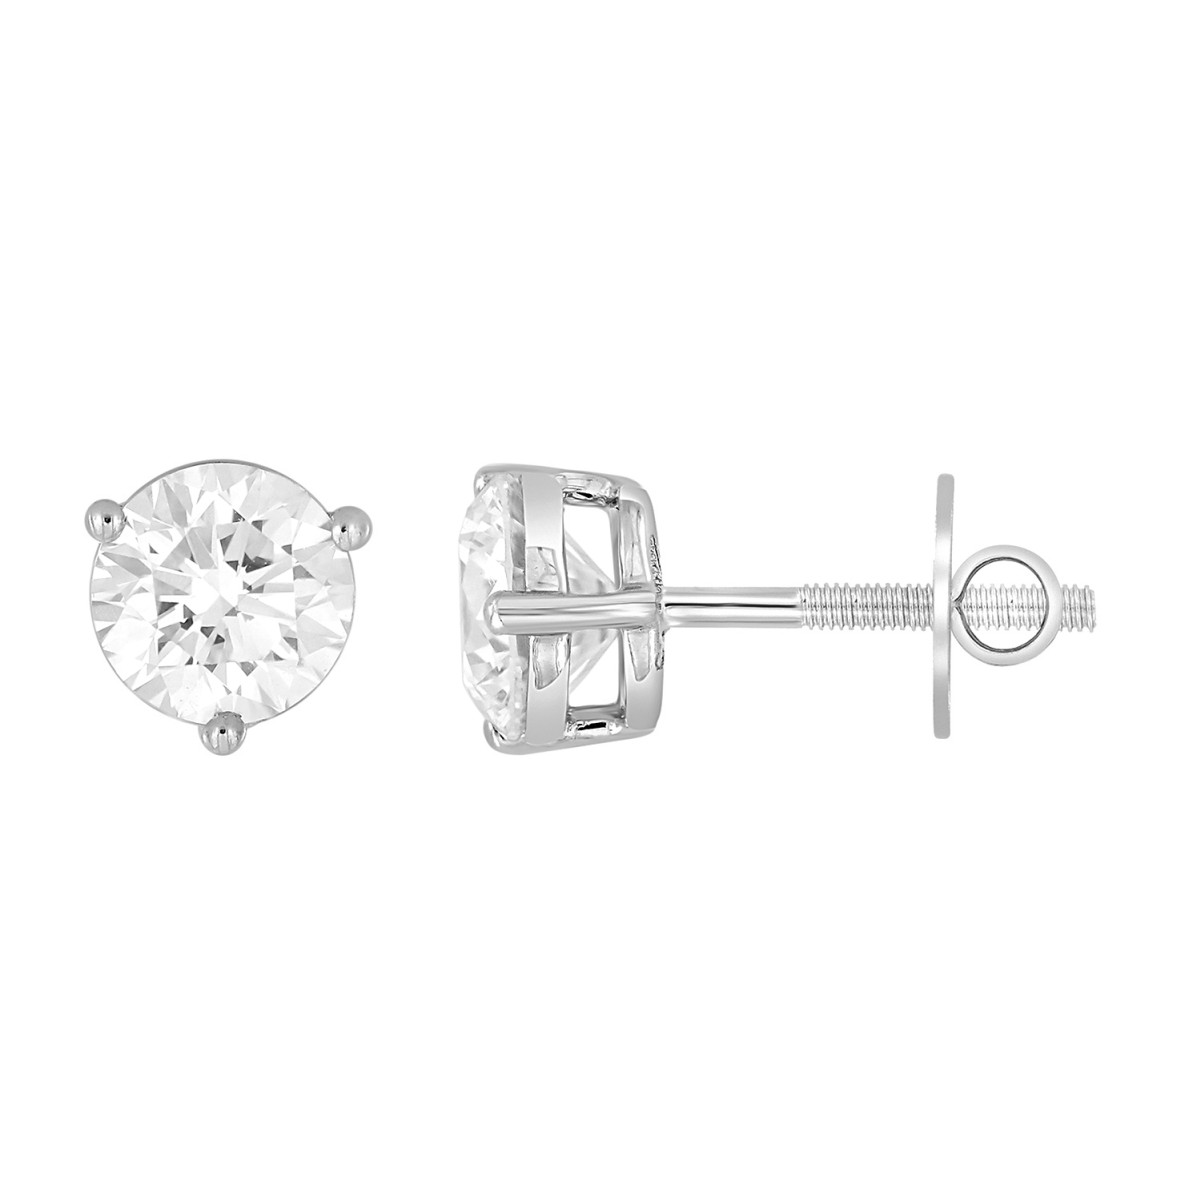 14K WHITE GOLD 1/2CT ROUND DIAMOND LADIES SOLITAIRE EARRINGS 